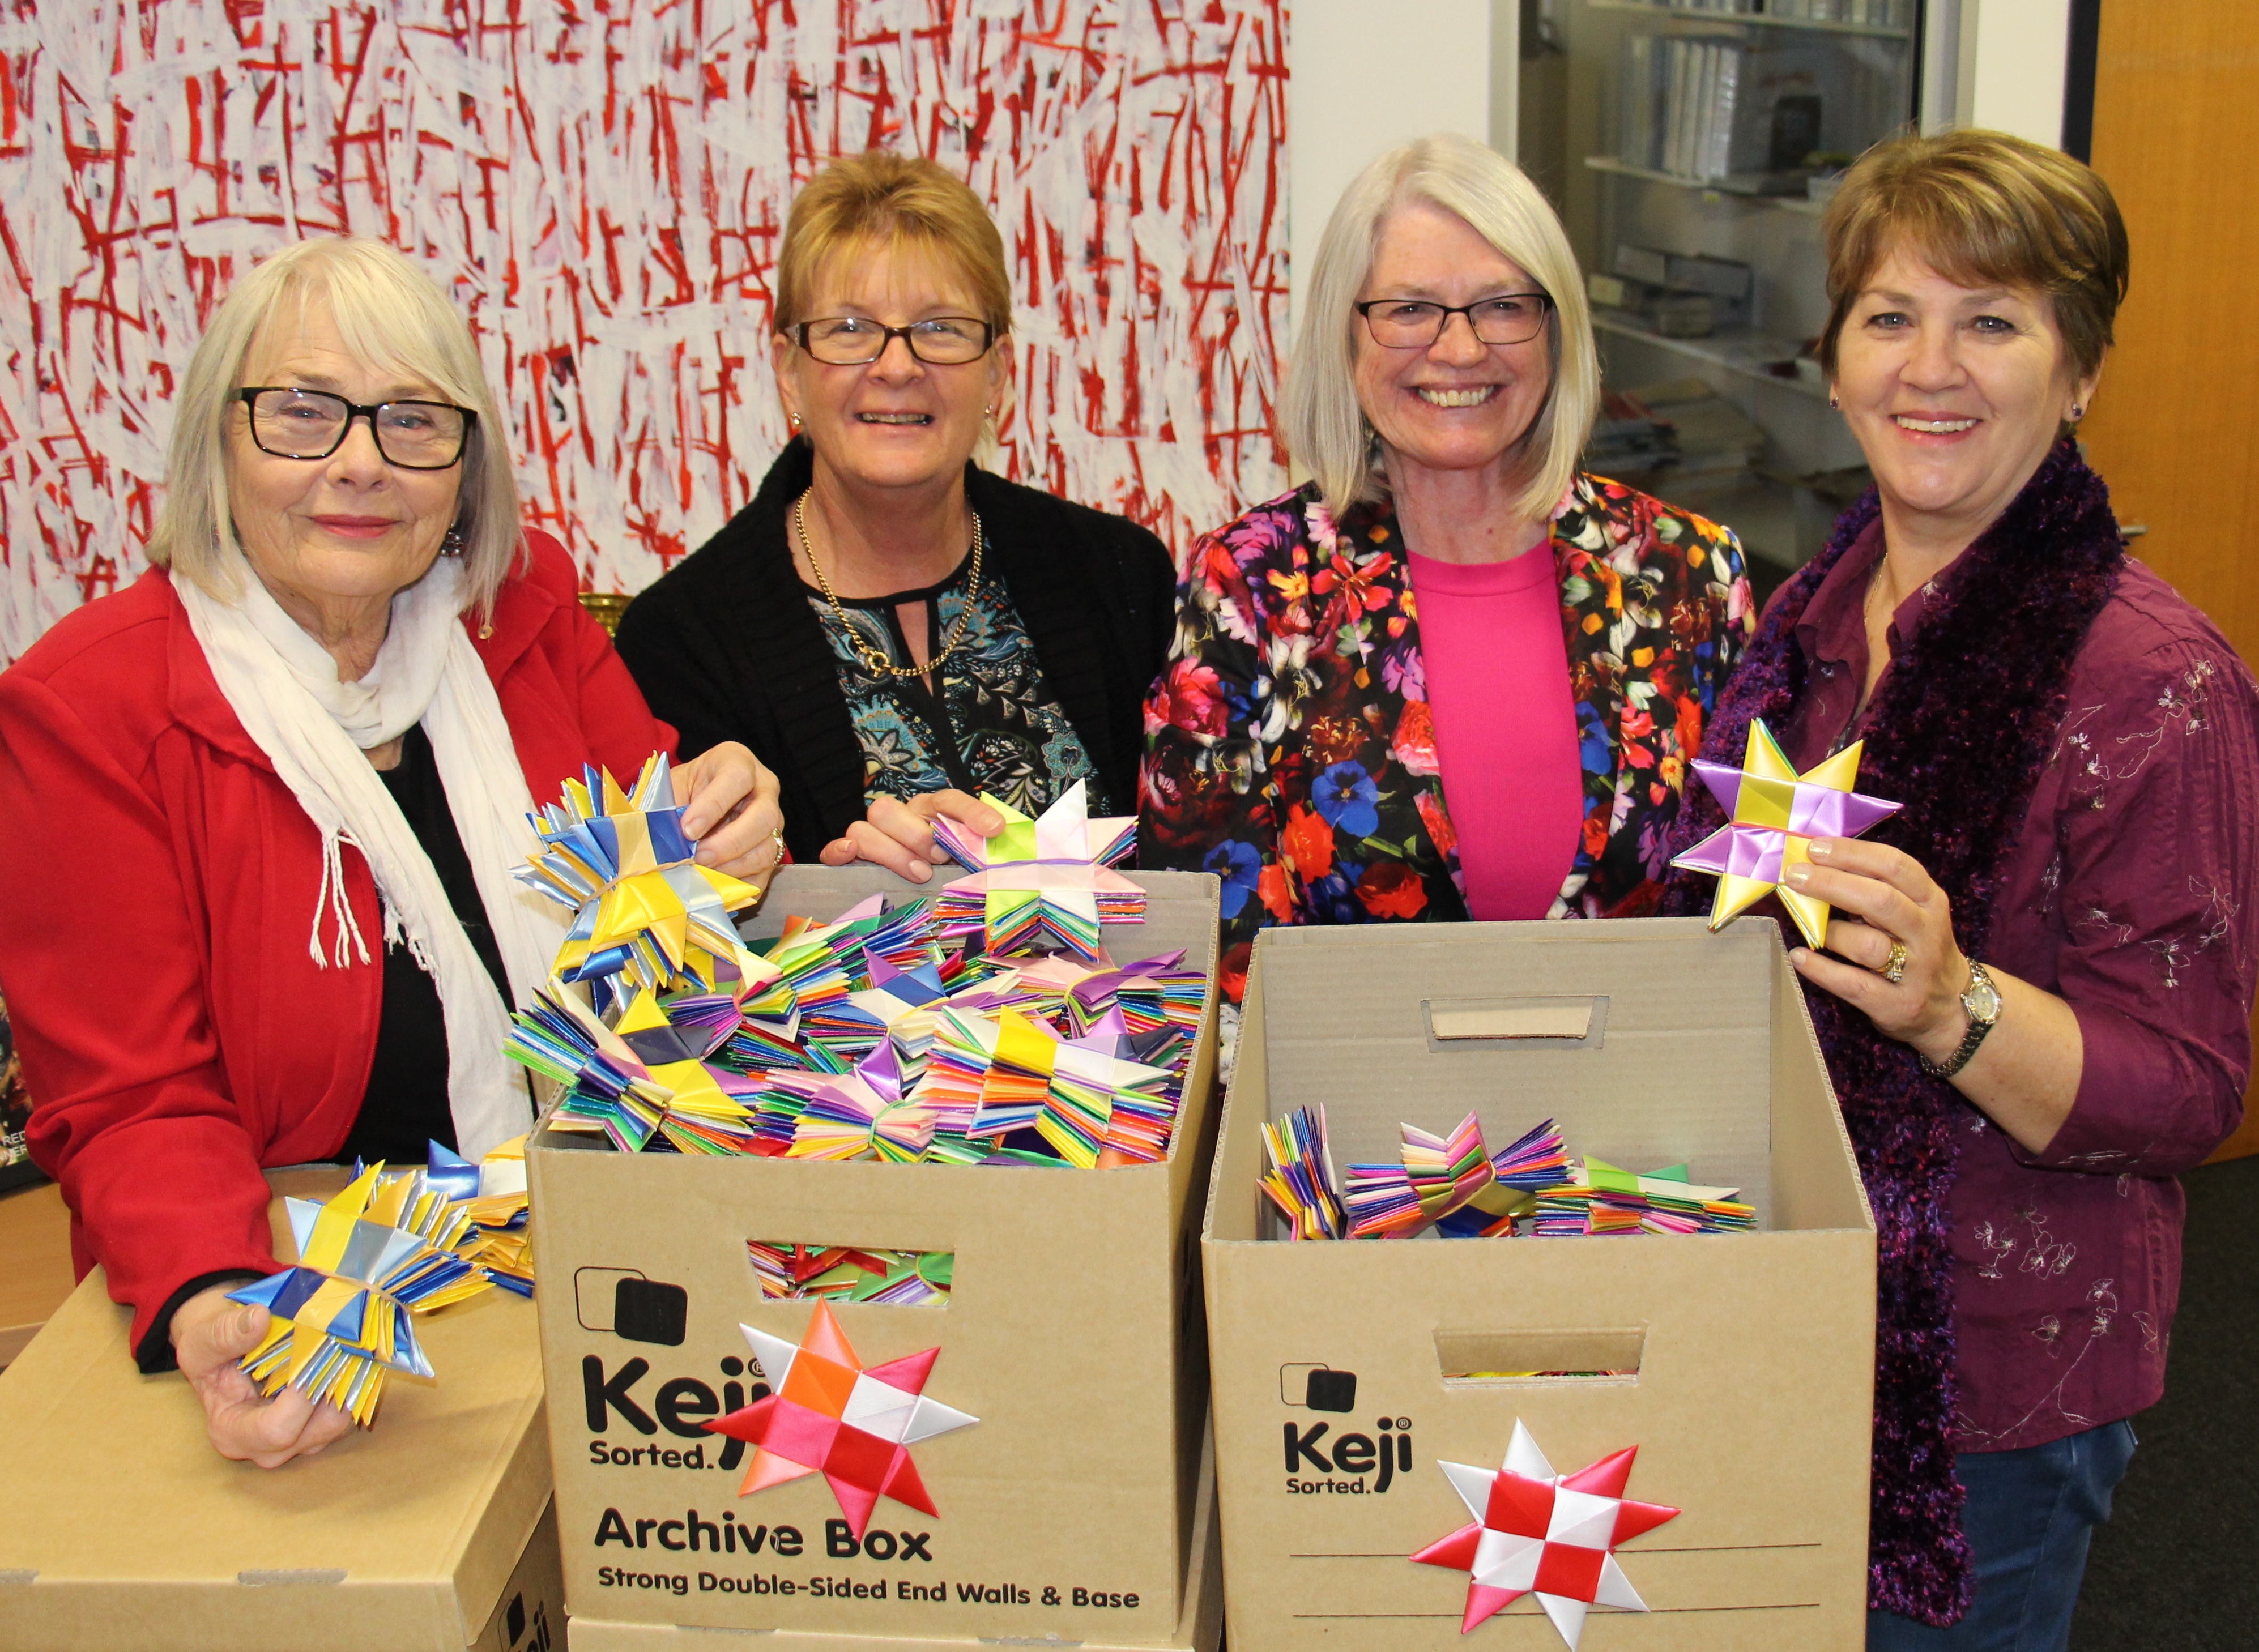 Professor Lesley Chenoweth AO, Heather Smith, Education and Professional Studies, Linda O'Brien, incoming Head of Logan campus and Ileana Whelan, Library and Learning Services, pack up Griffithâ€™s contribution to the 1 Million Stars project for delivery.